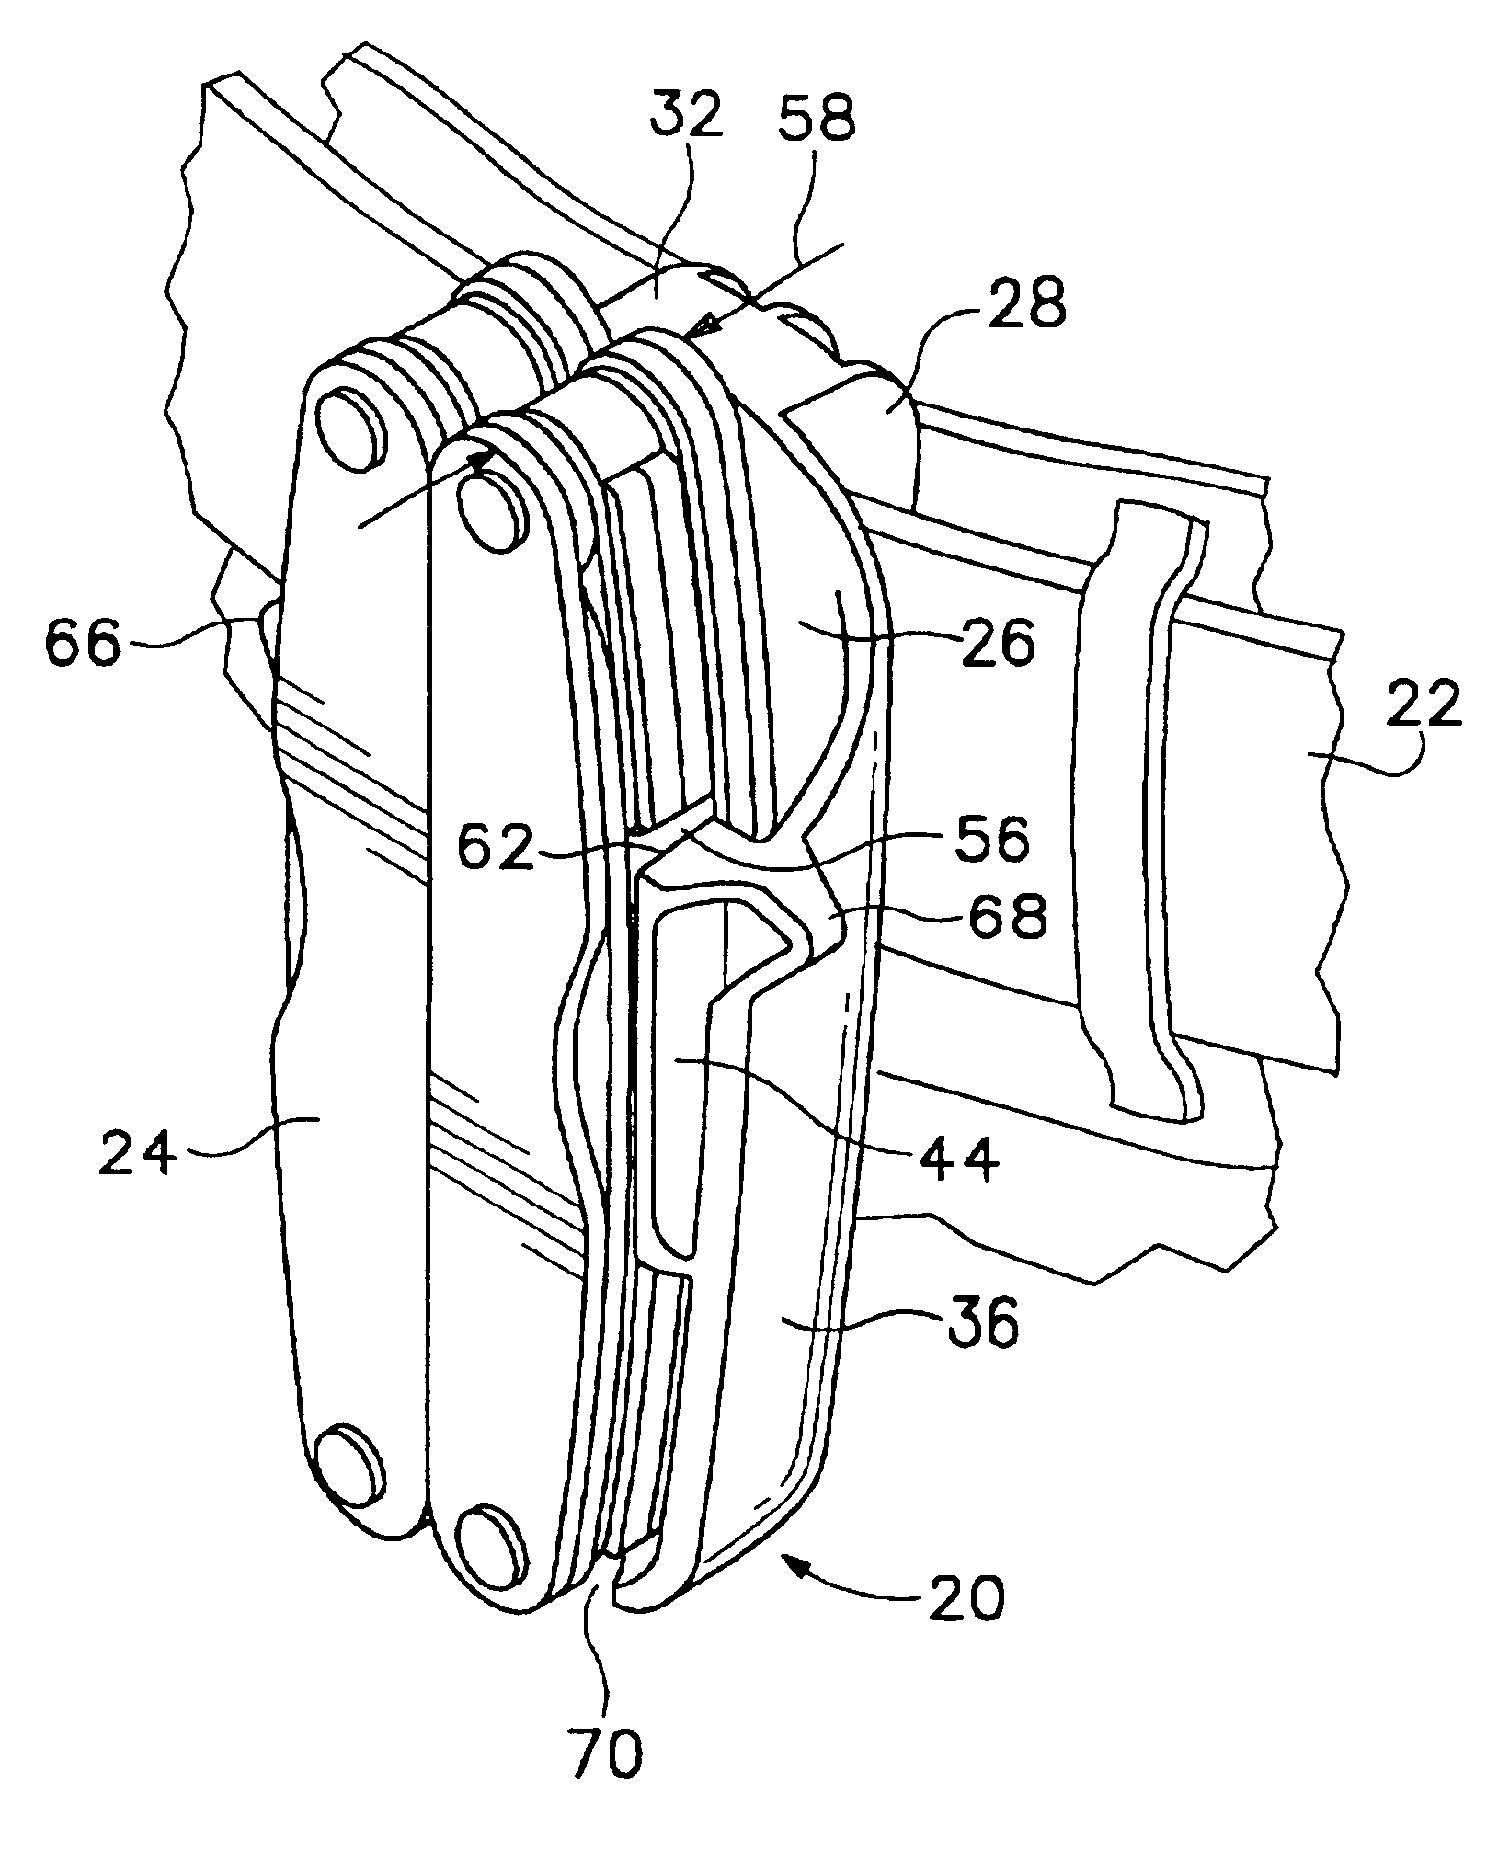 Carrier for attaching a multipurpose tool to a belt